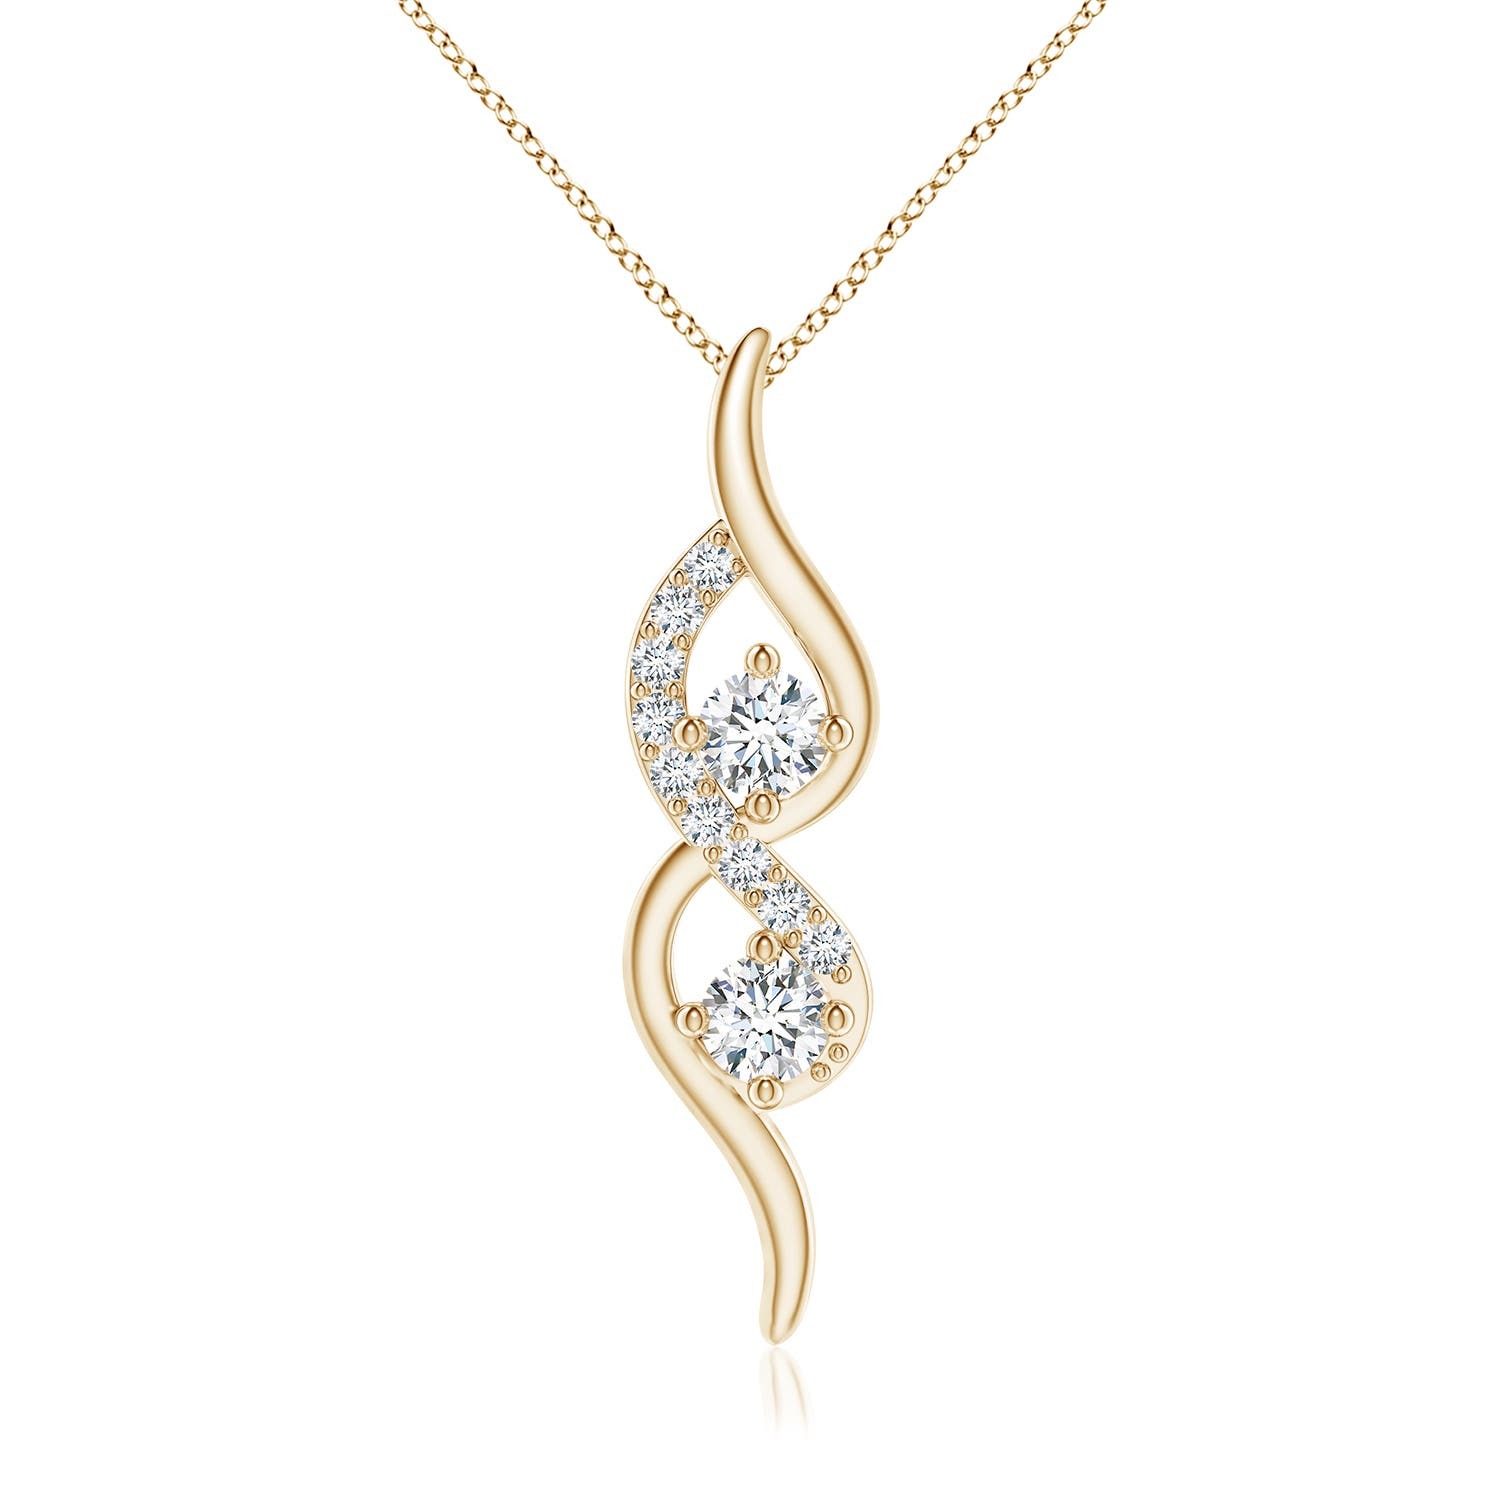 Primary image for ANGARA Lab-Grown 0.34 Ct Two Stone Diamond Swirl Pendant Necklace in 14K Gold